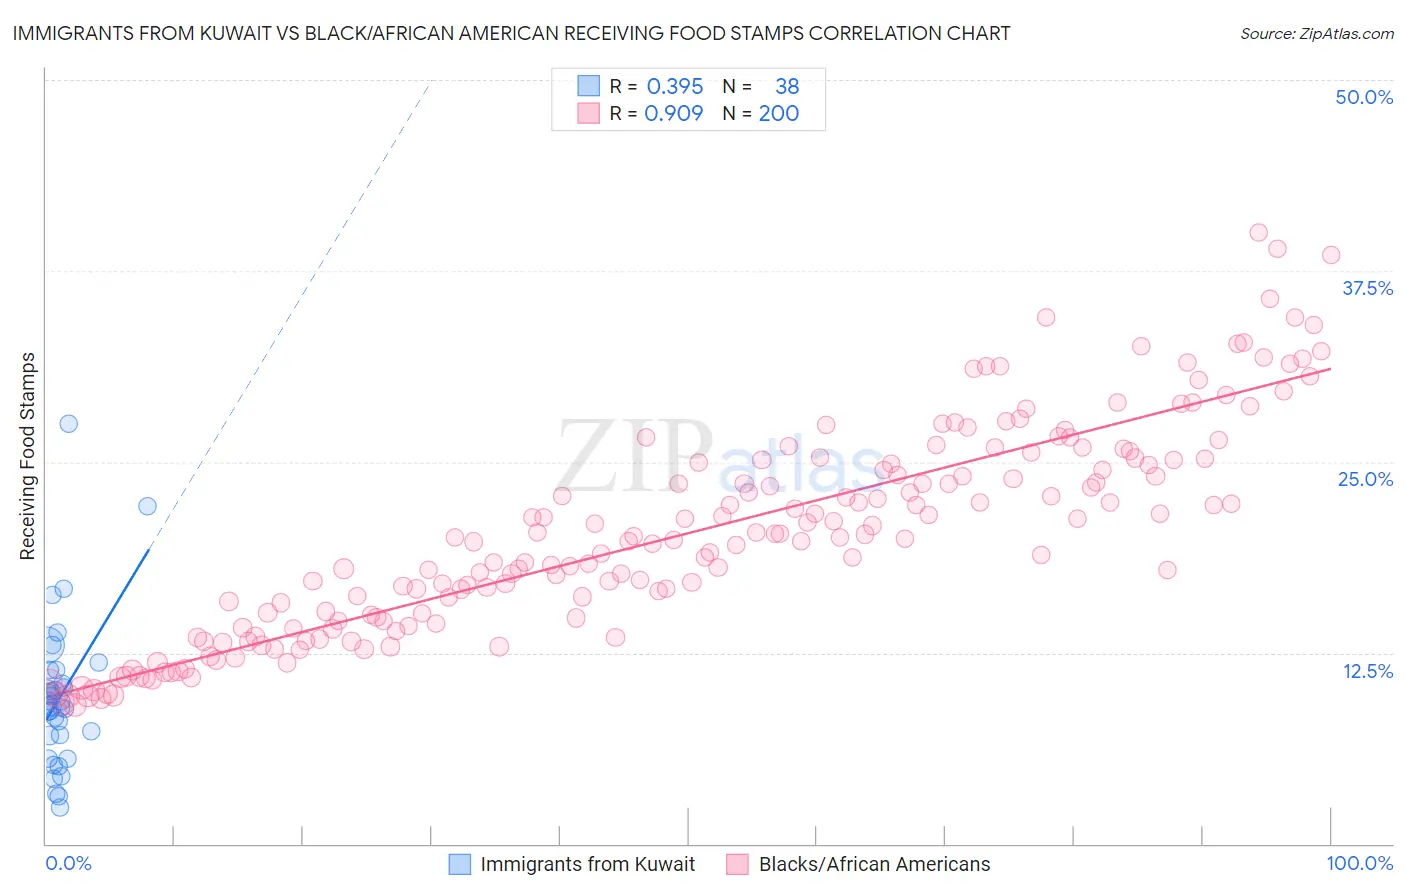 Immigrants from Kuwait vs Black/African American Receiving Food Stamps